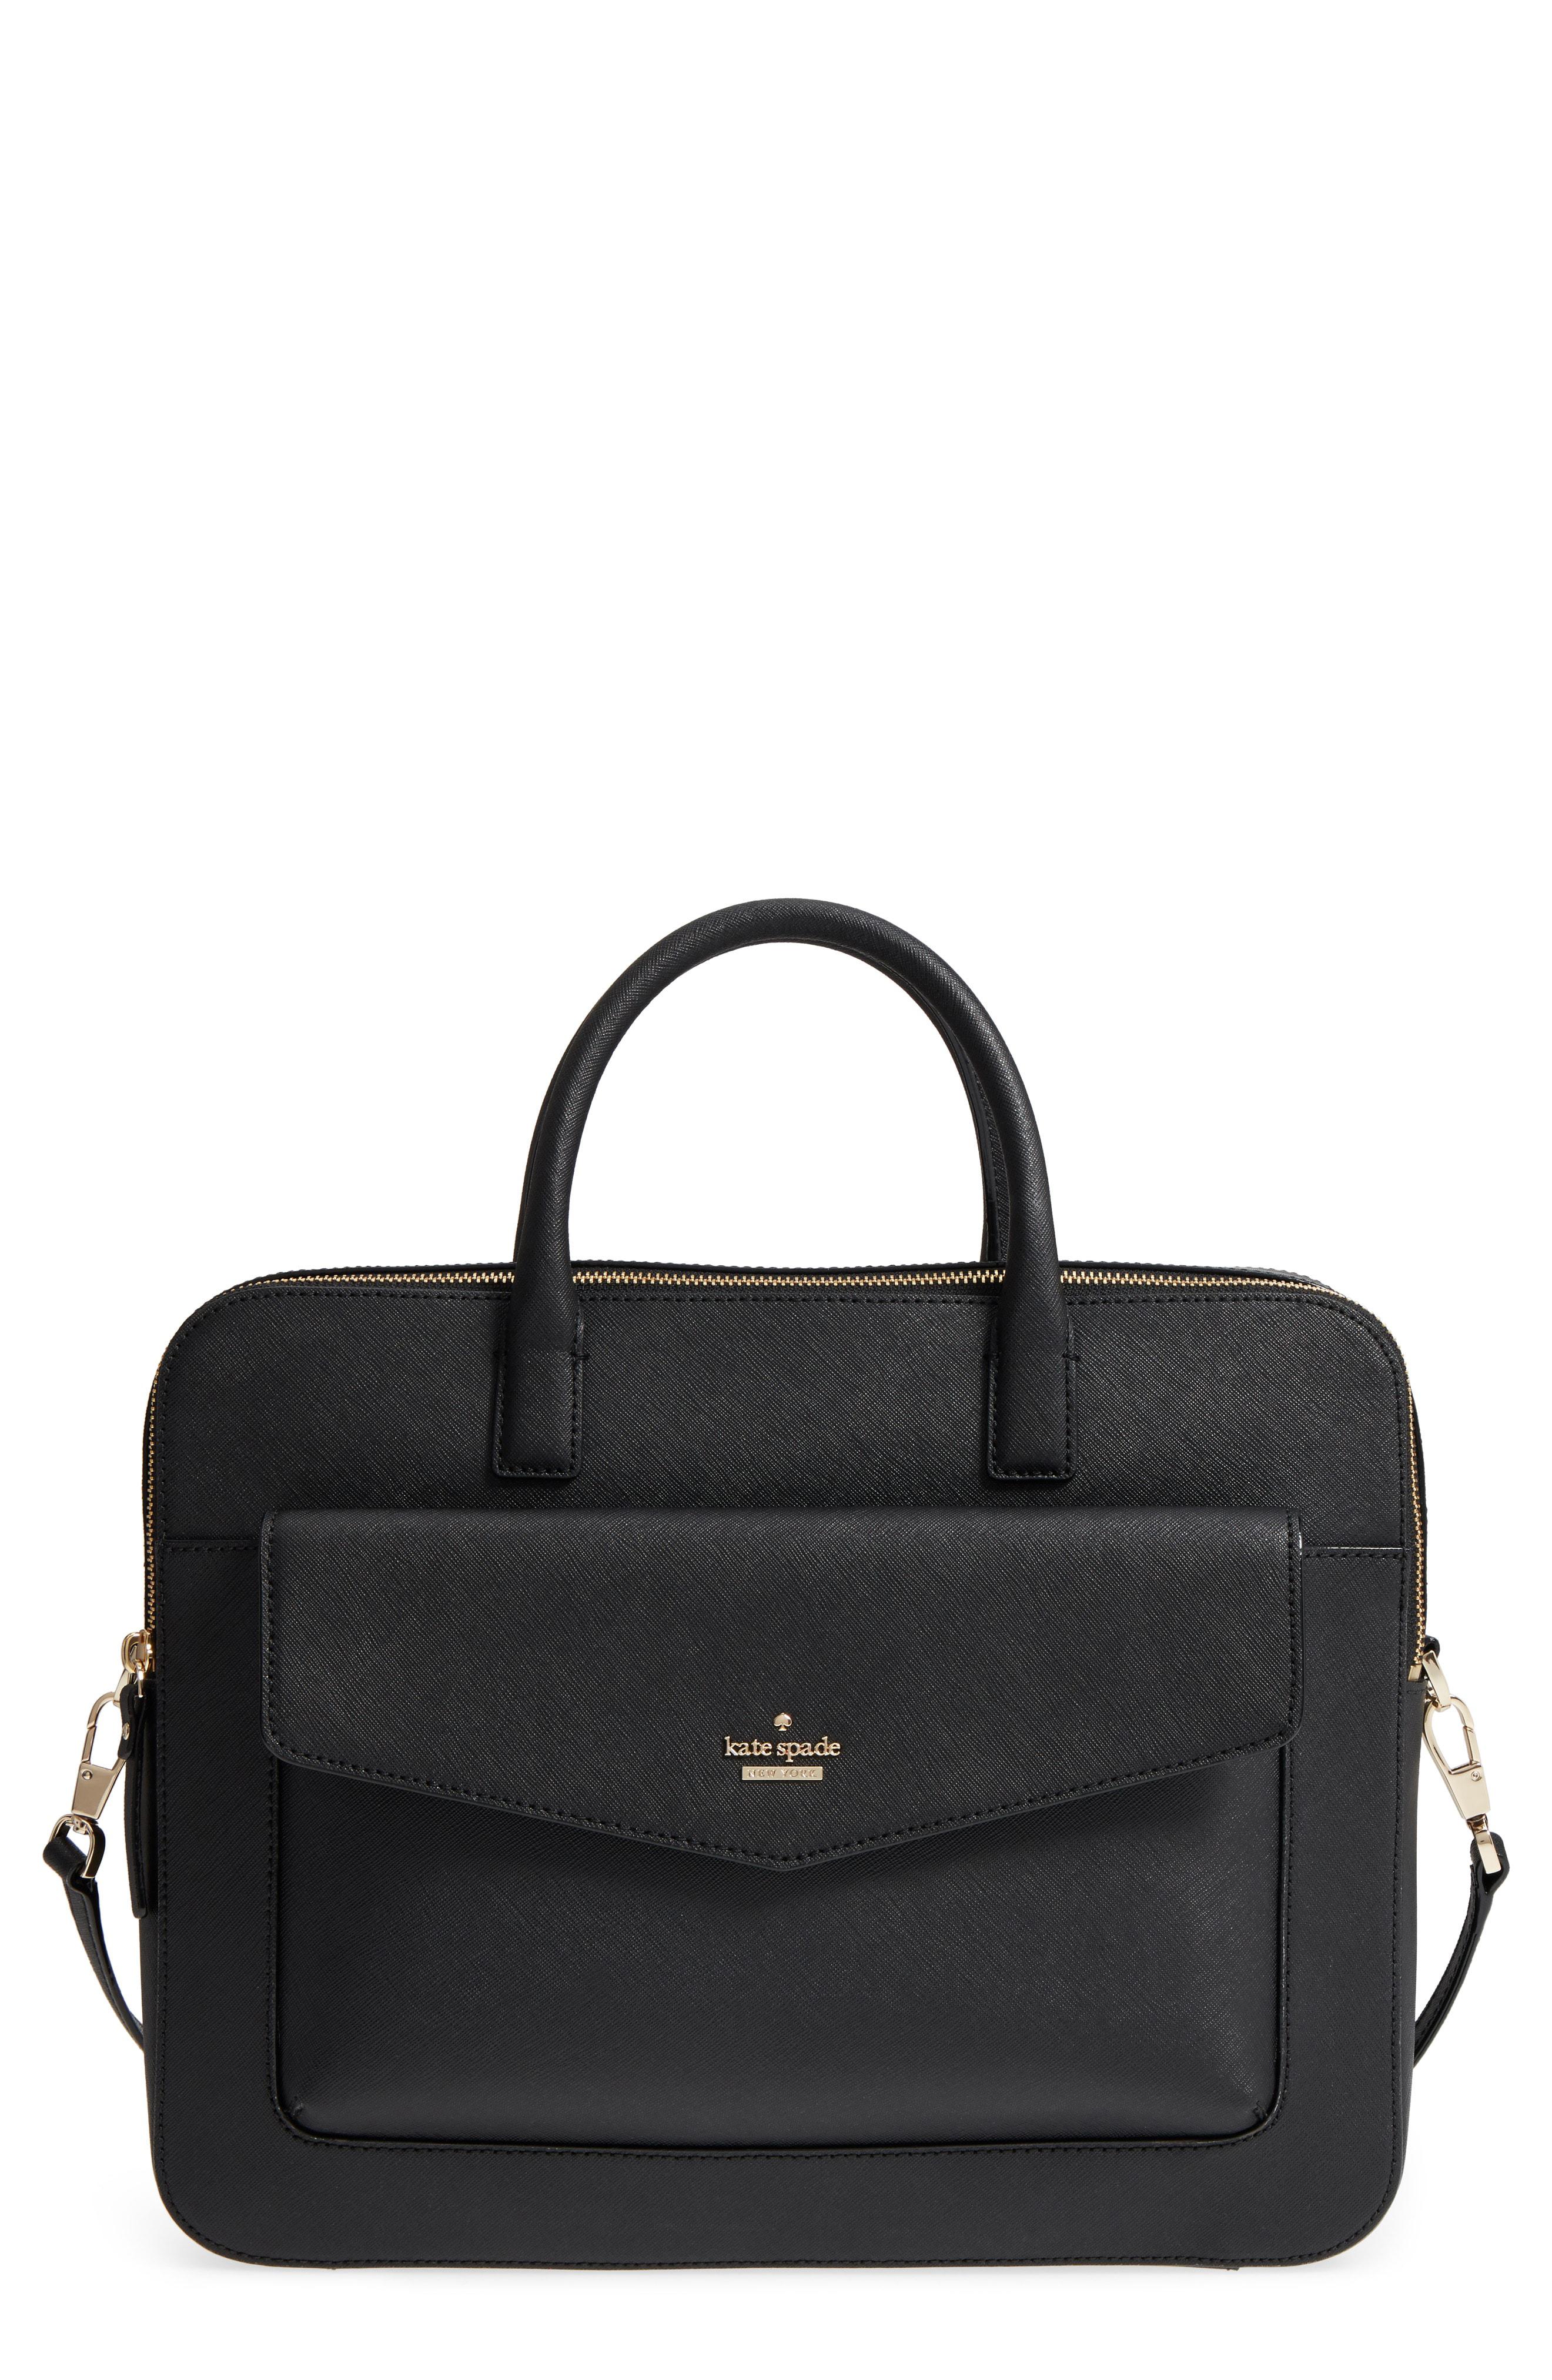 Lyst - Kate Spade 13-inch Leather Laptop Bag in Black